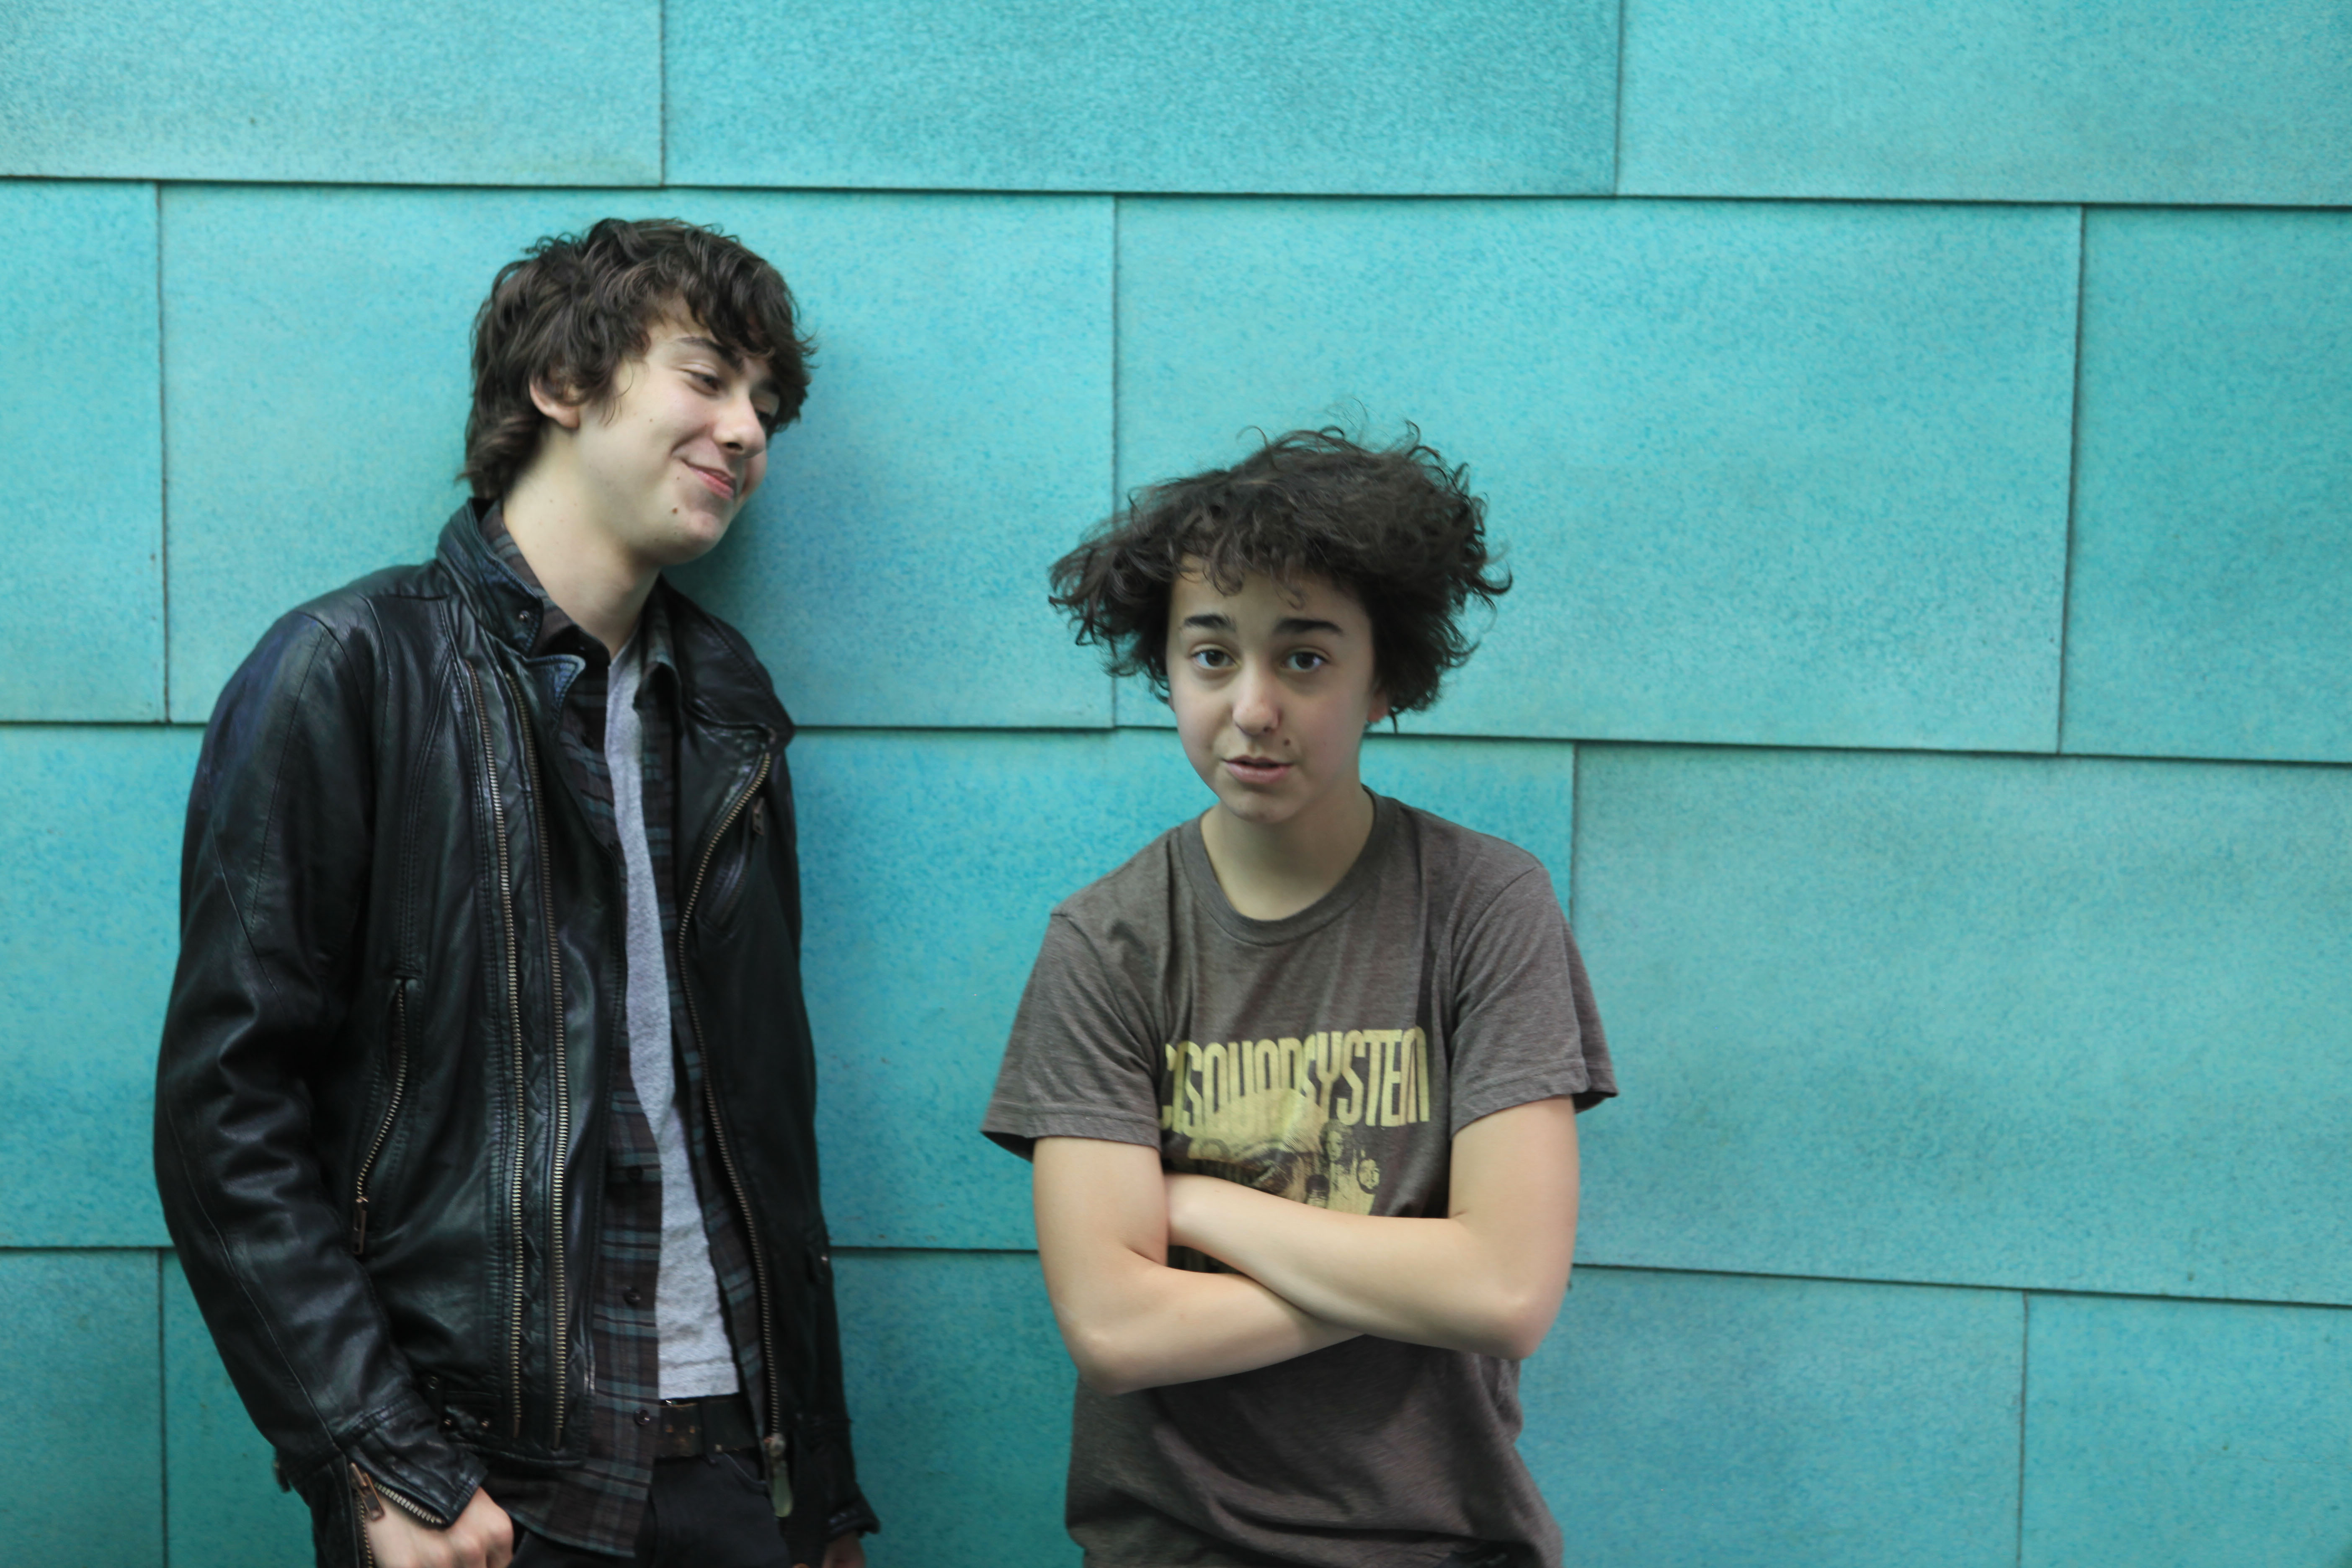 Www the naked brothers band if thats not love